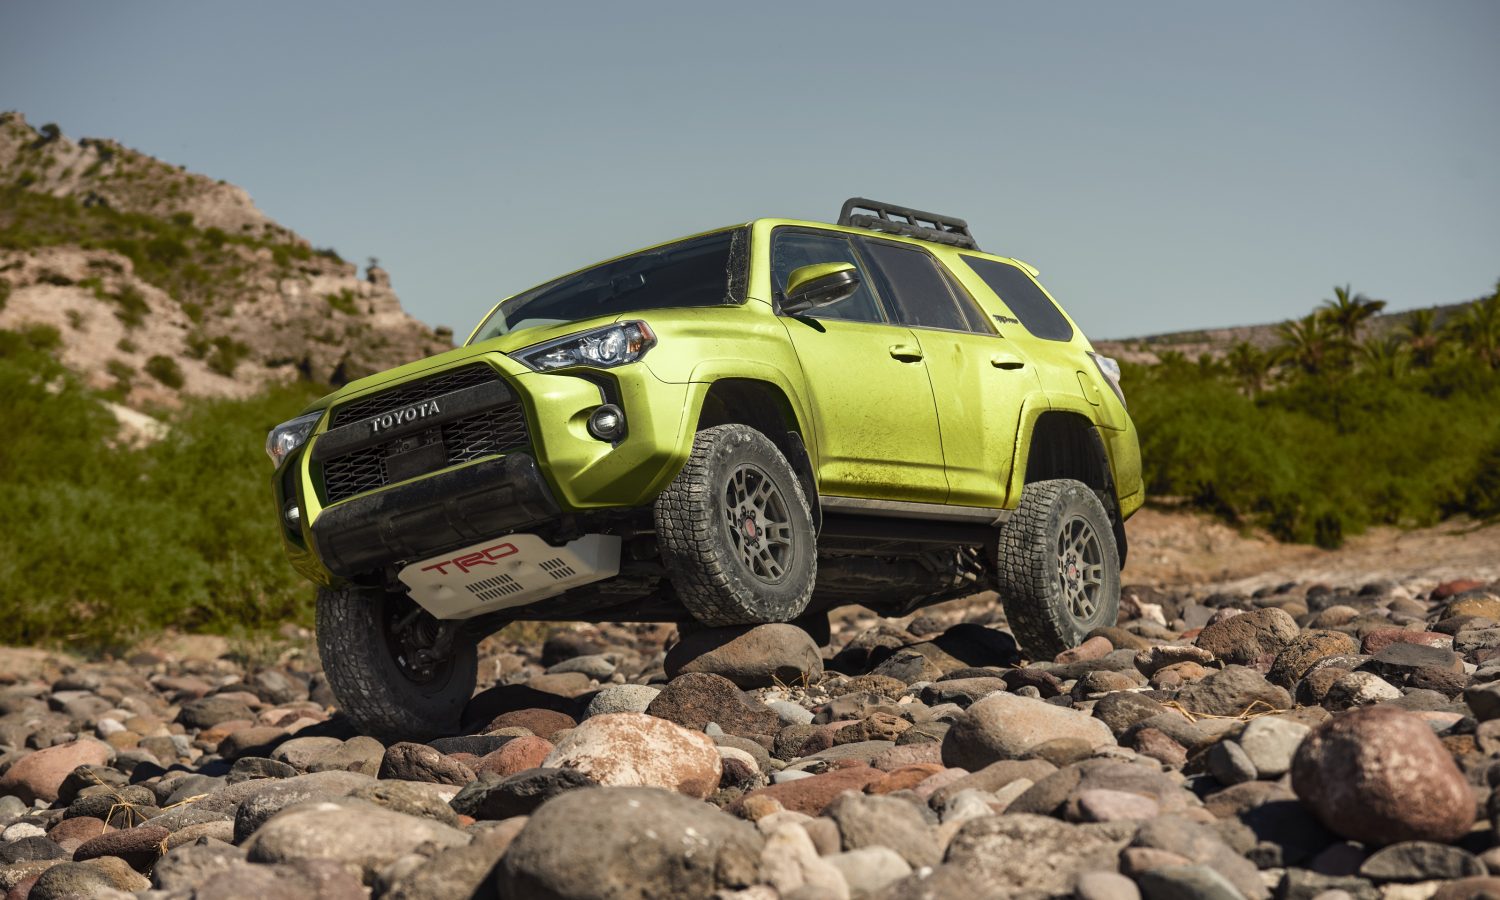 Top 12 SUVs for Summer Camping in Canada - Toyota 4Runner